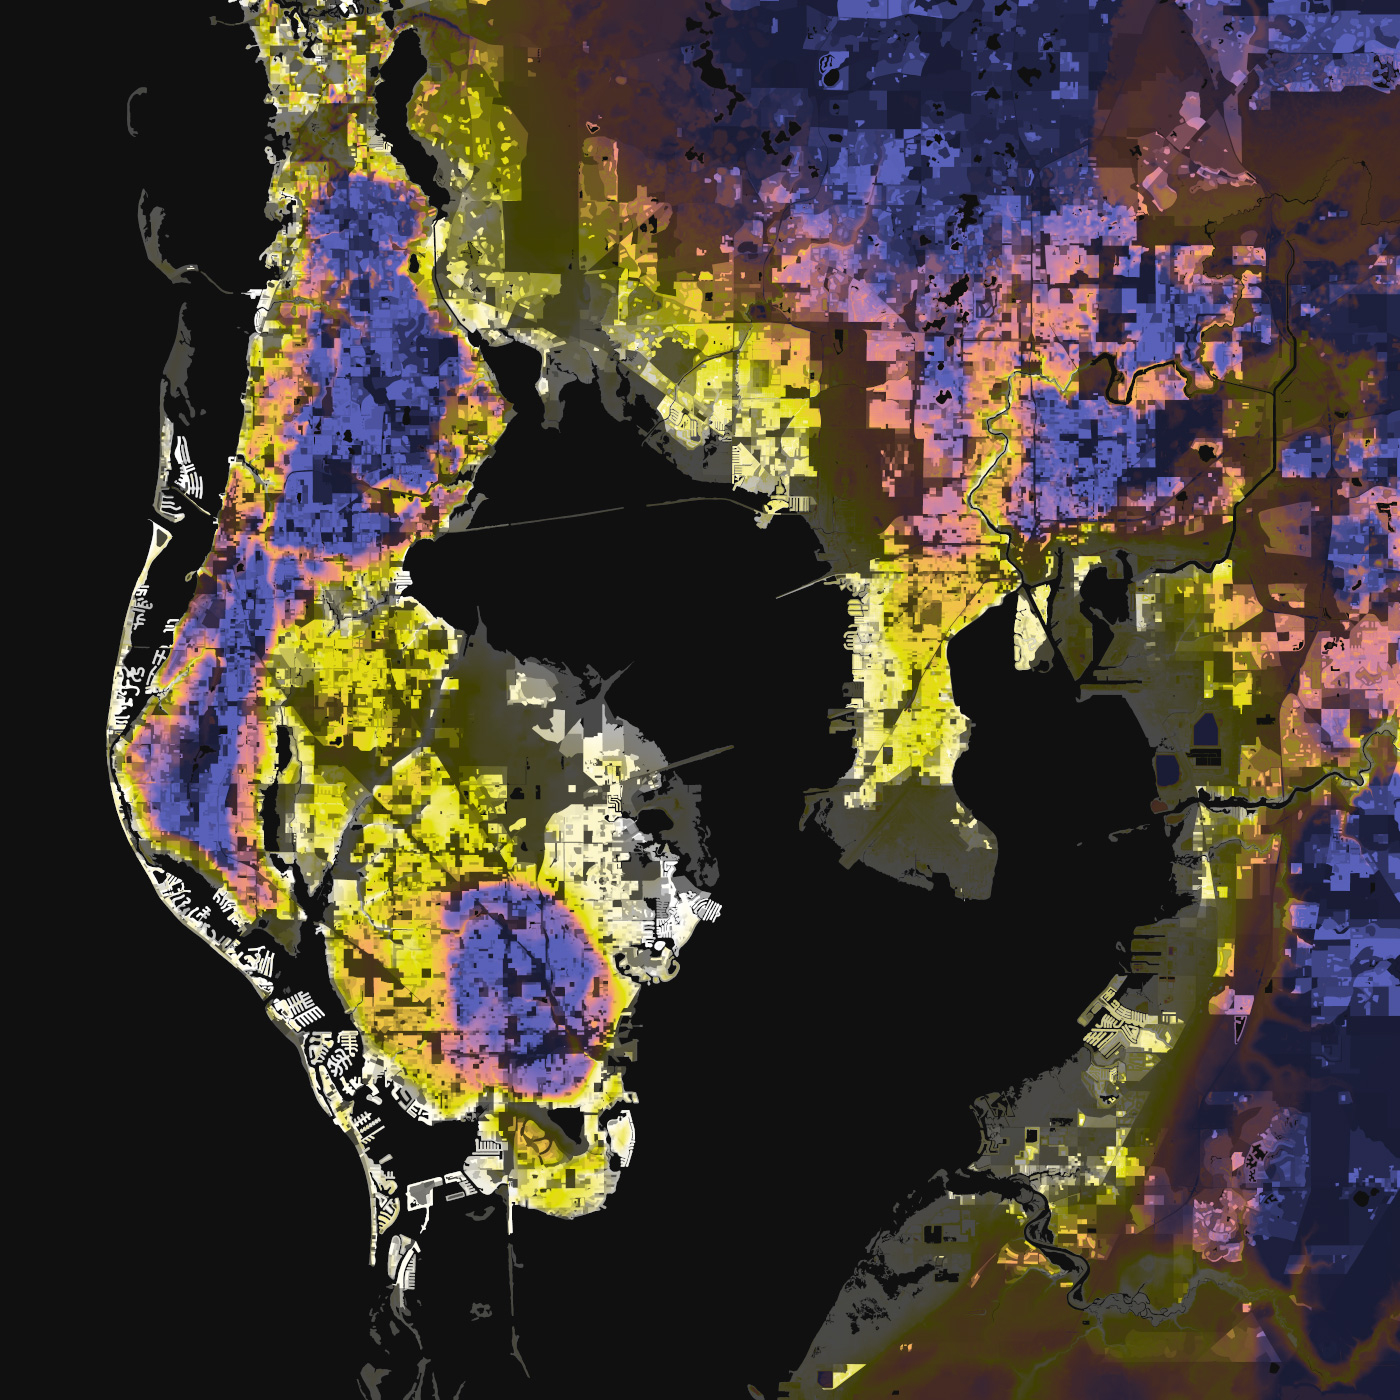 Tampa-St. Petersburg, Florida – Elevation And Population Density, 2010 - Florida Elevation Map